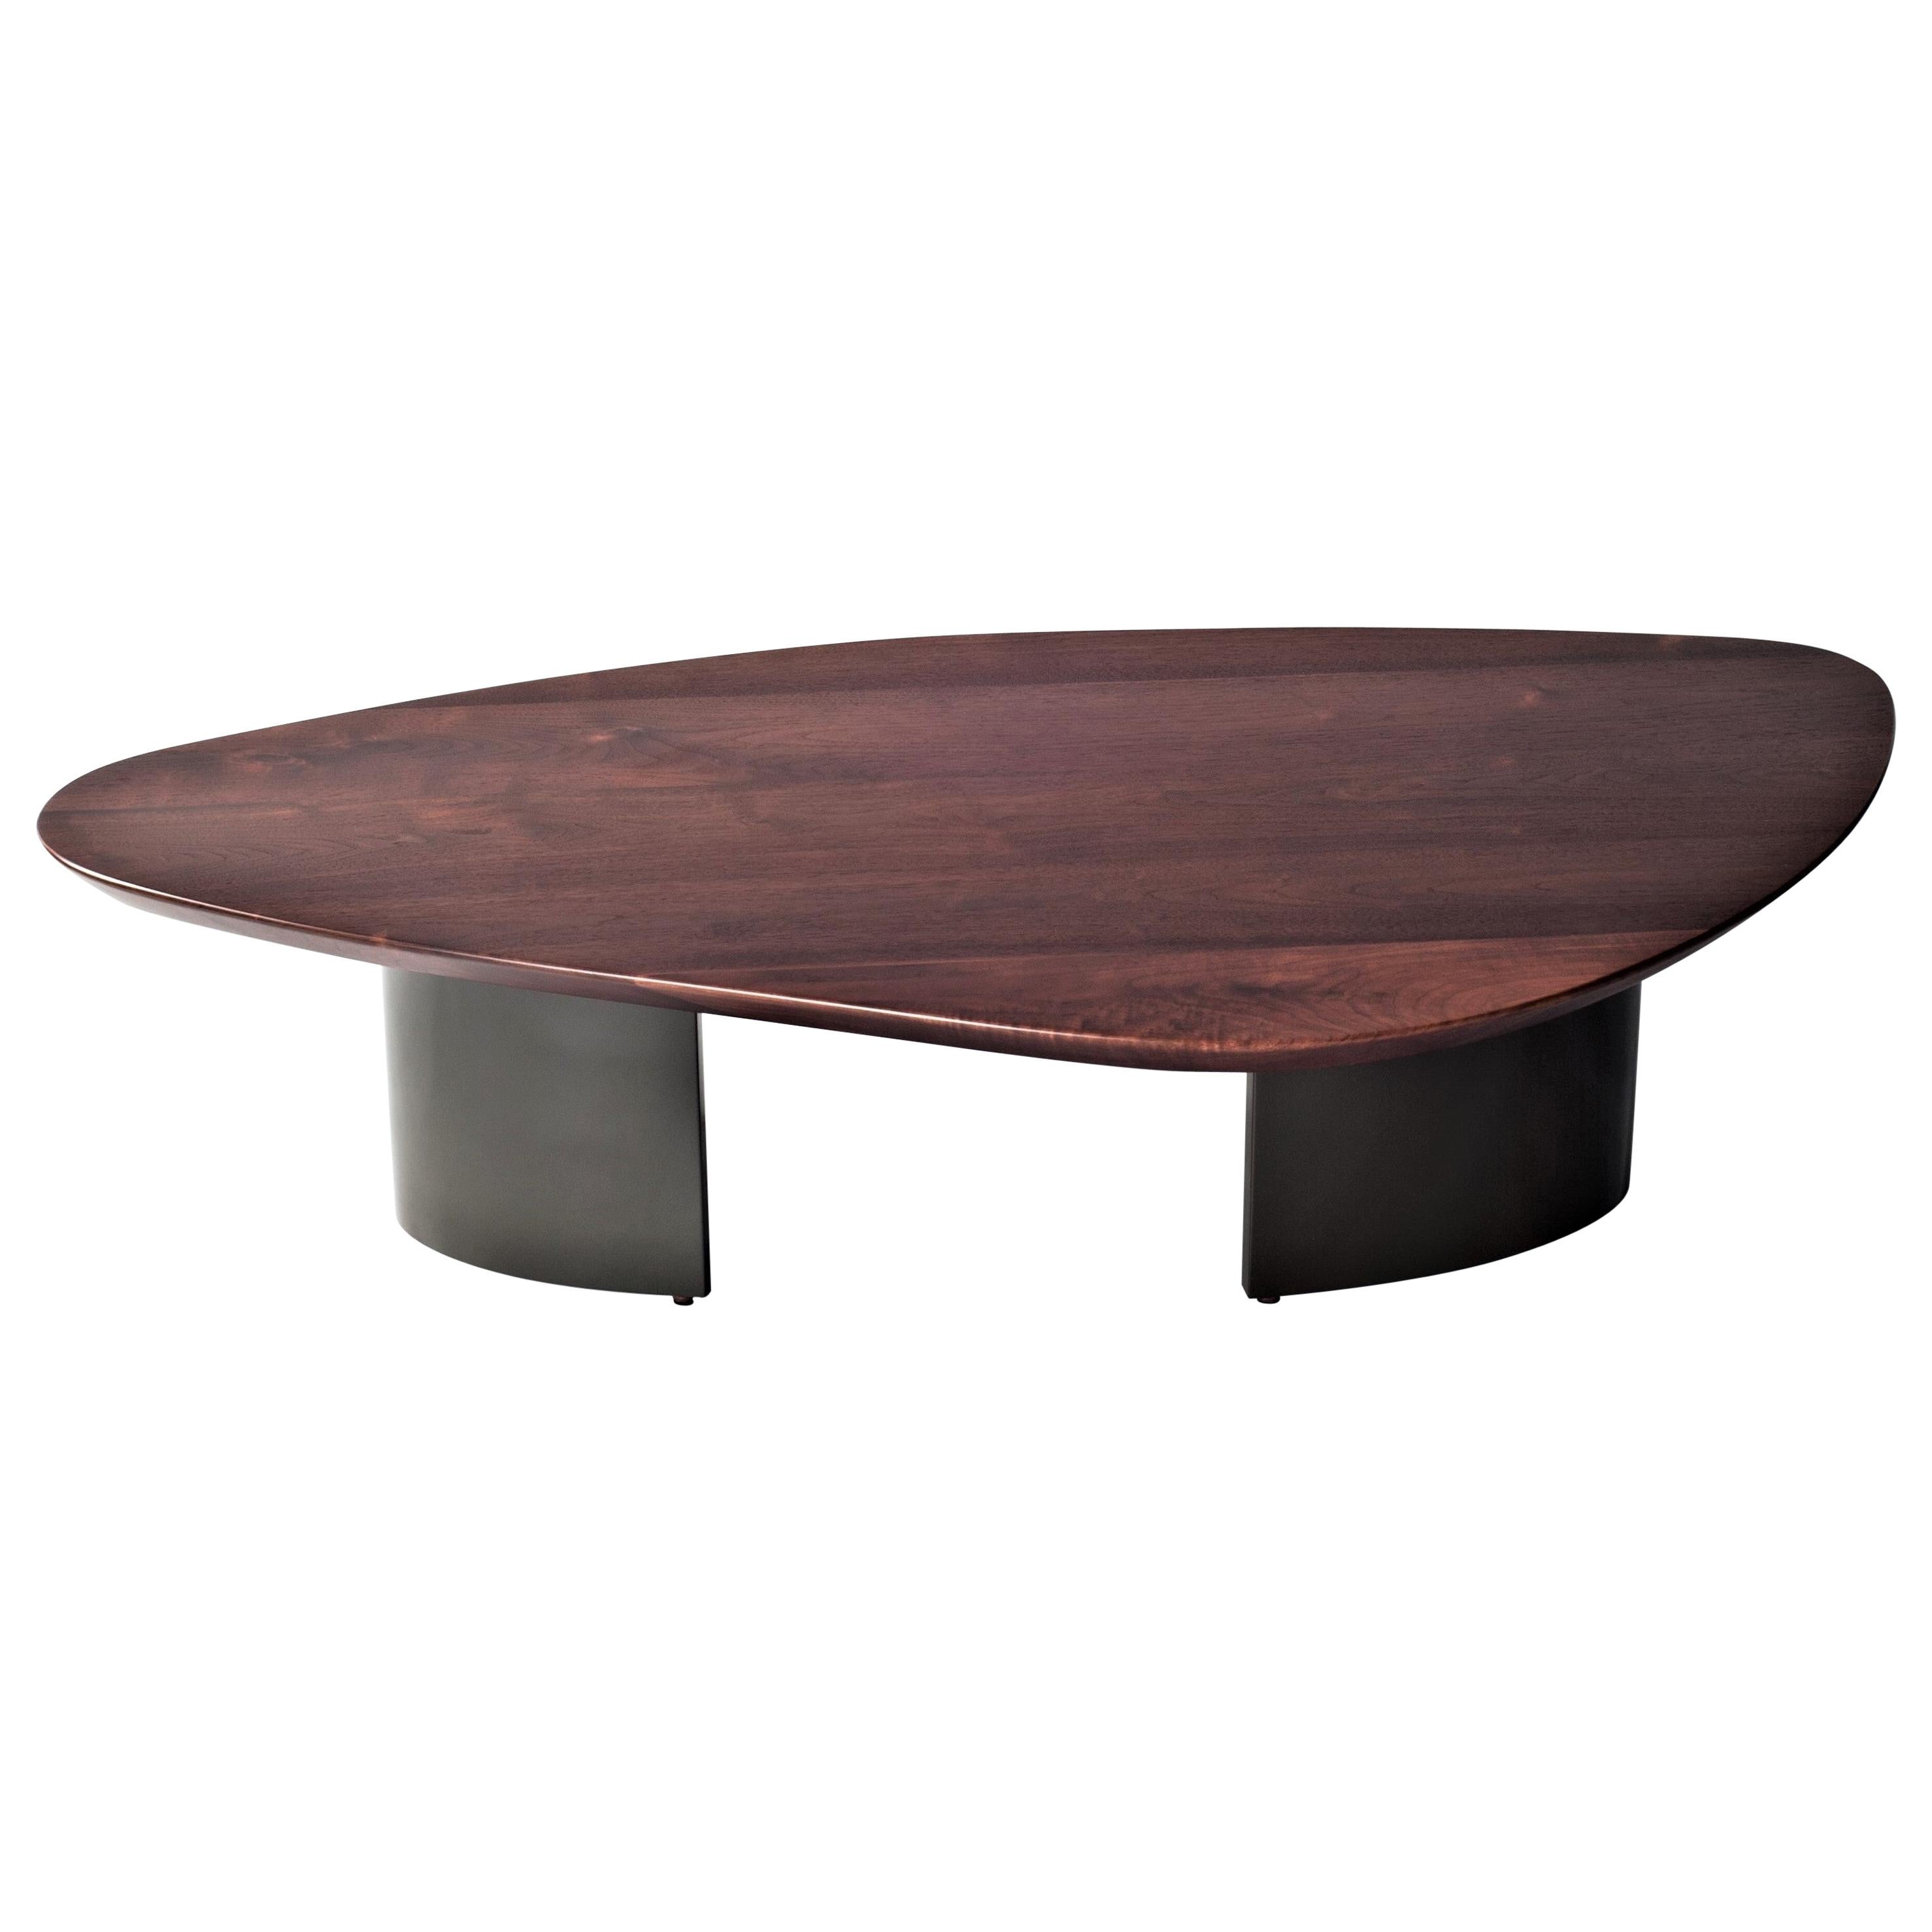 Ledge Coffee Table by DeMuro Das in Solid Walnut with Olive Grey Lacquered Base